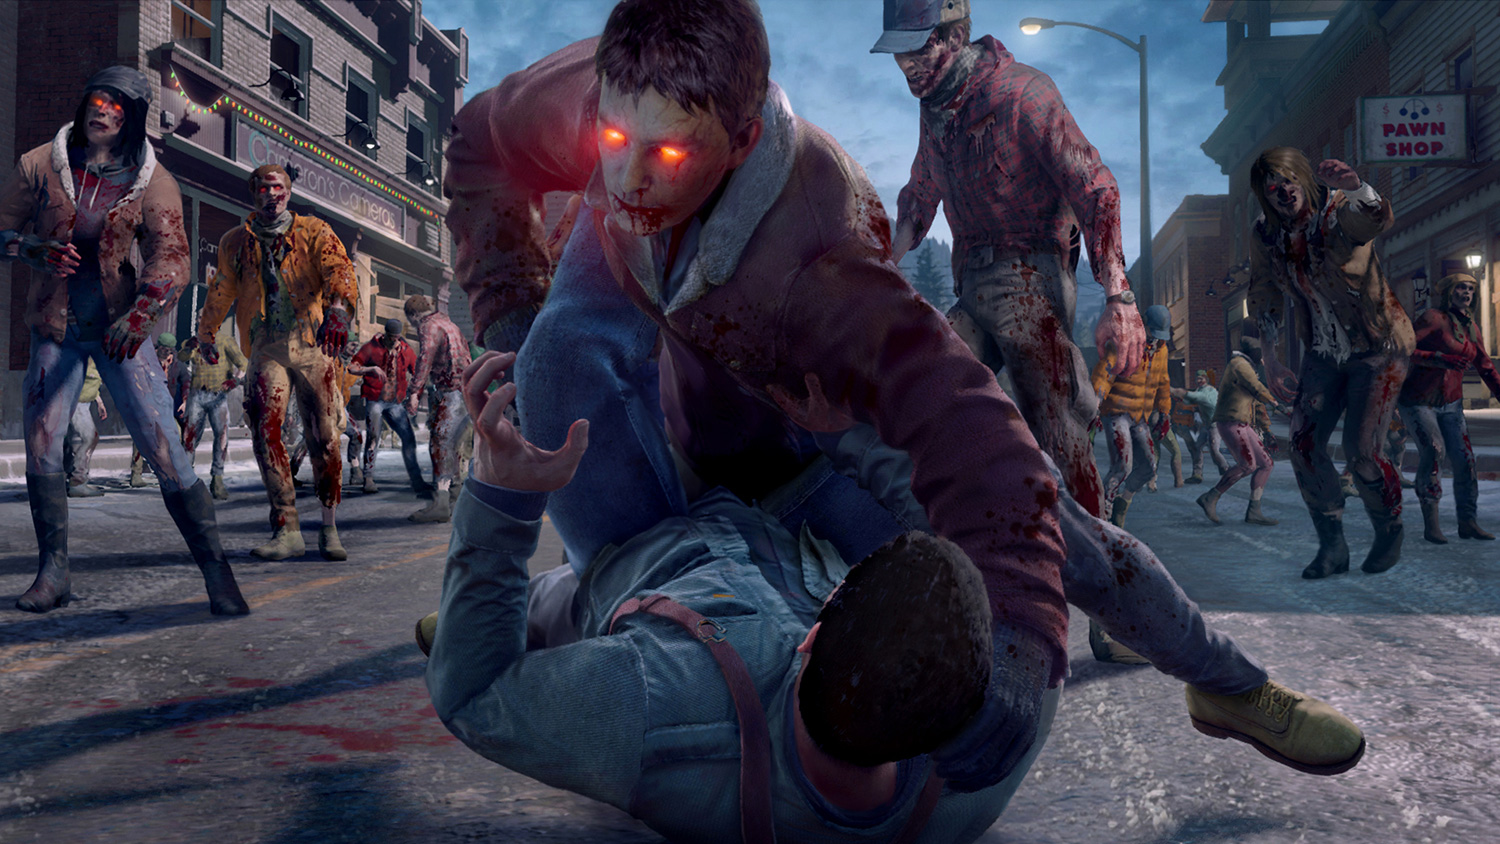 Dead Rising 4 review: Cheeky zombie-fighting on Xbox One and Windows 10